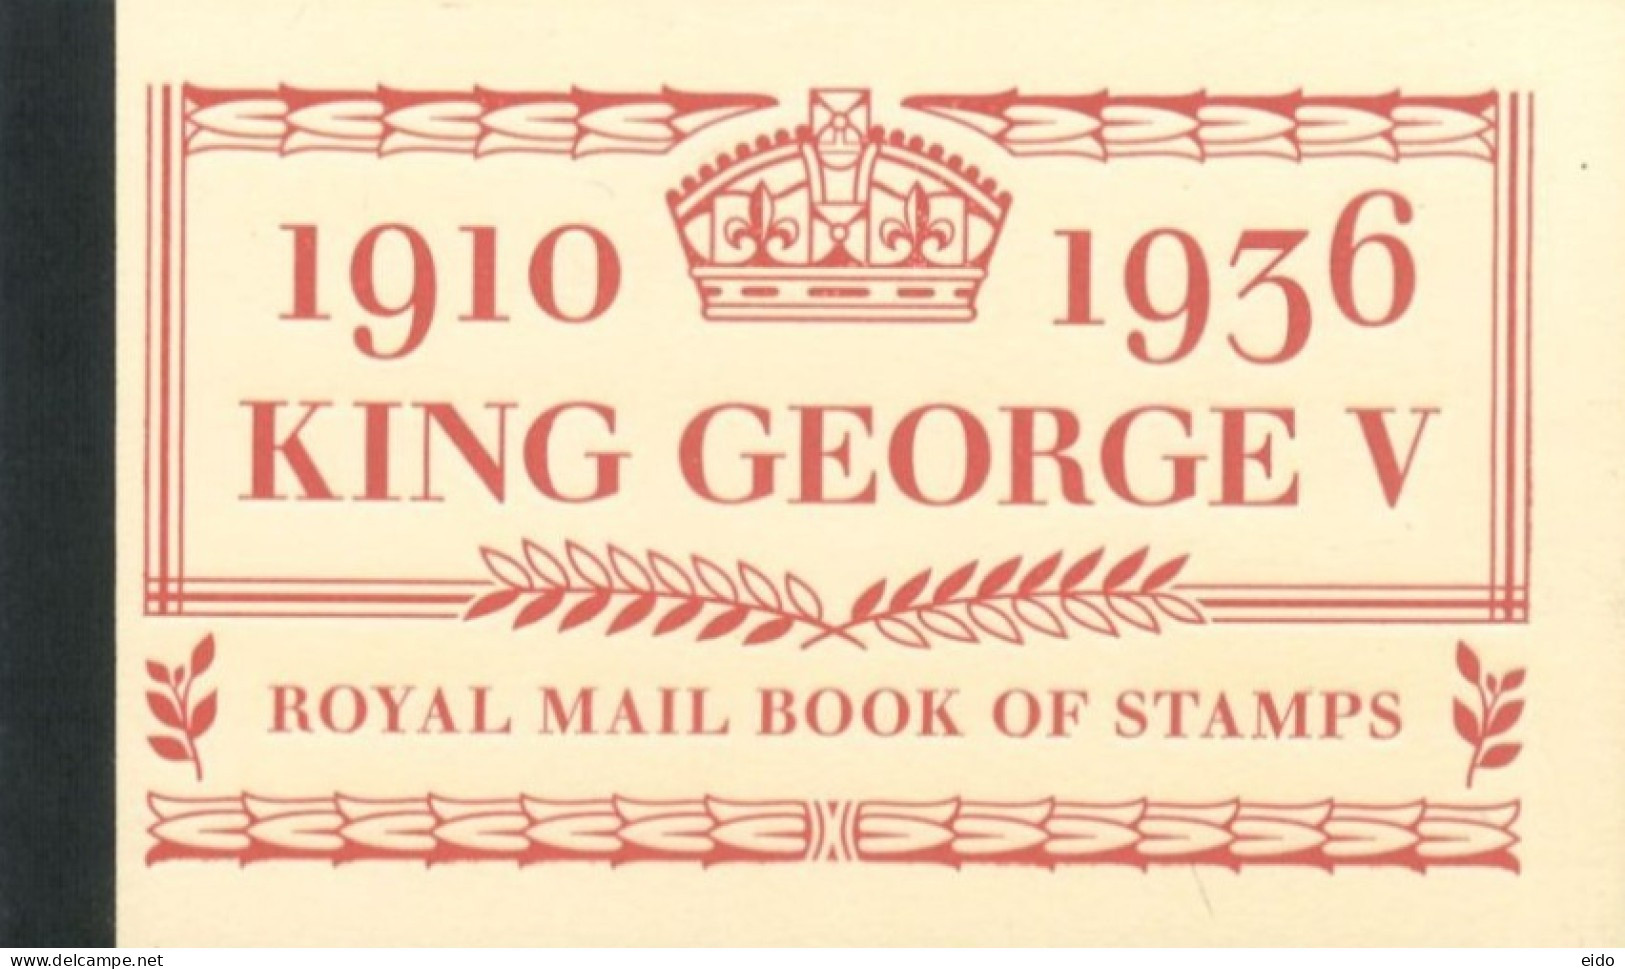 GREAT BRITAIN  : - 2010, SPECIAL ISSUE OF ROYAL MAIL STAMPS BOOKLET OF (1910 - 1936) KING GEORGE V. UMM (**). - Briefe U. Dokumente